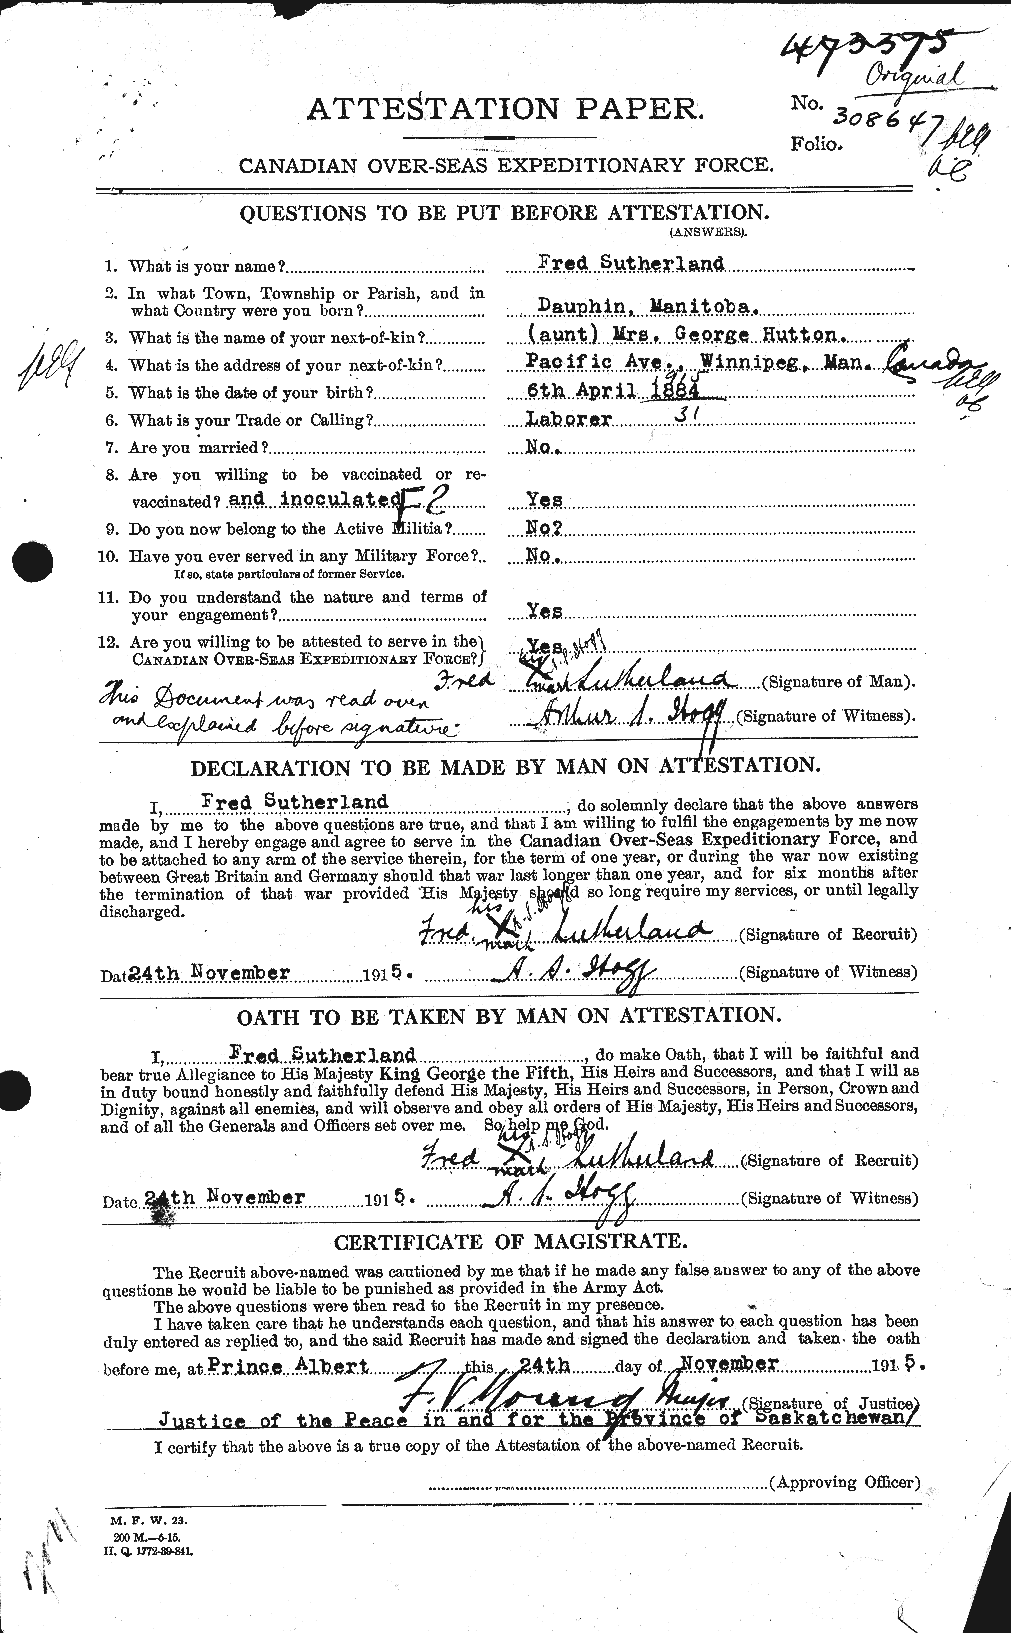 Personnel Records of the First World War - CEF 124878a